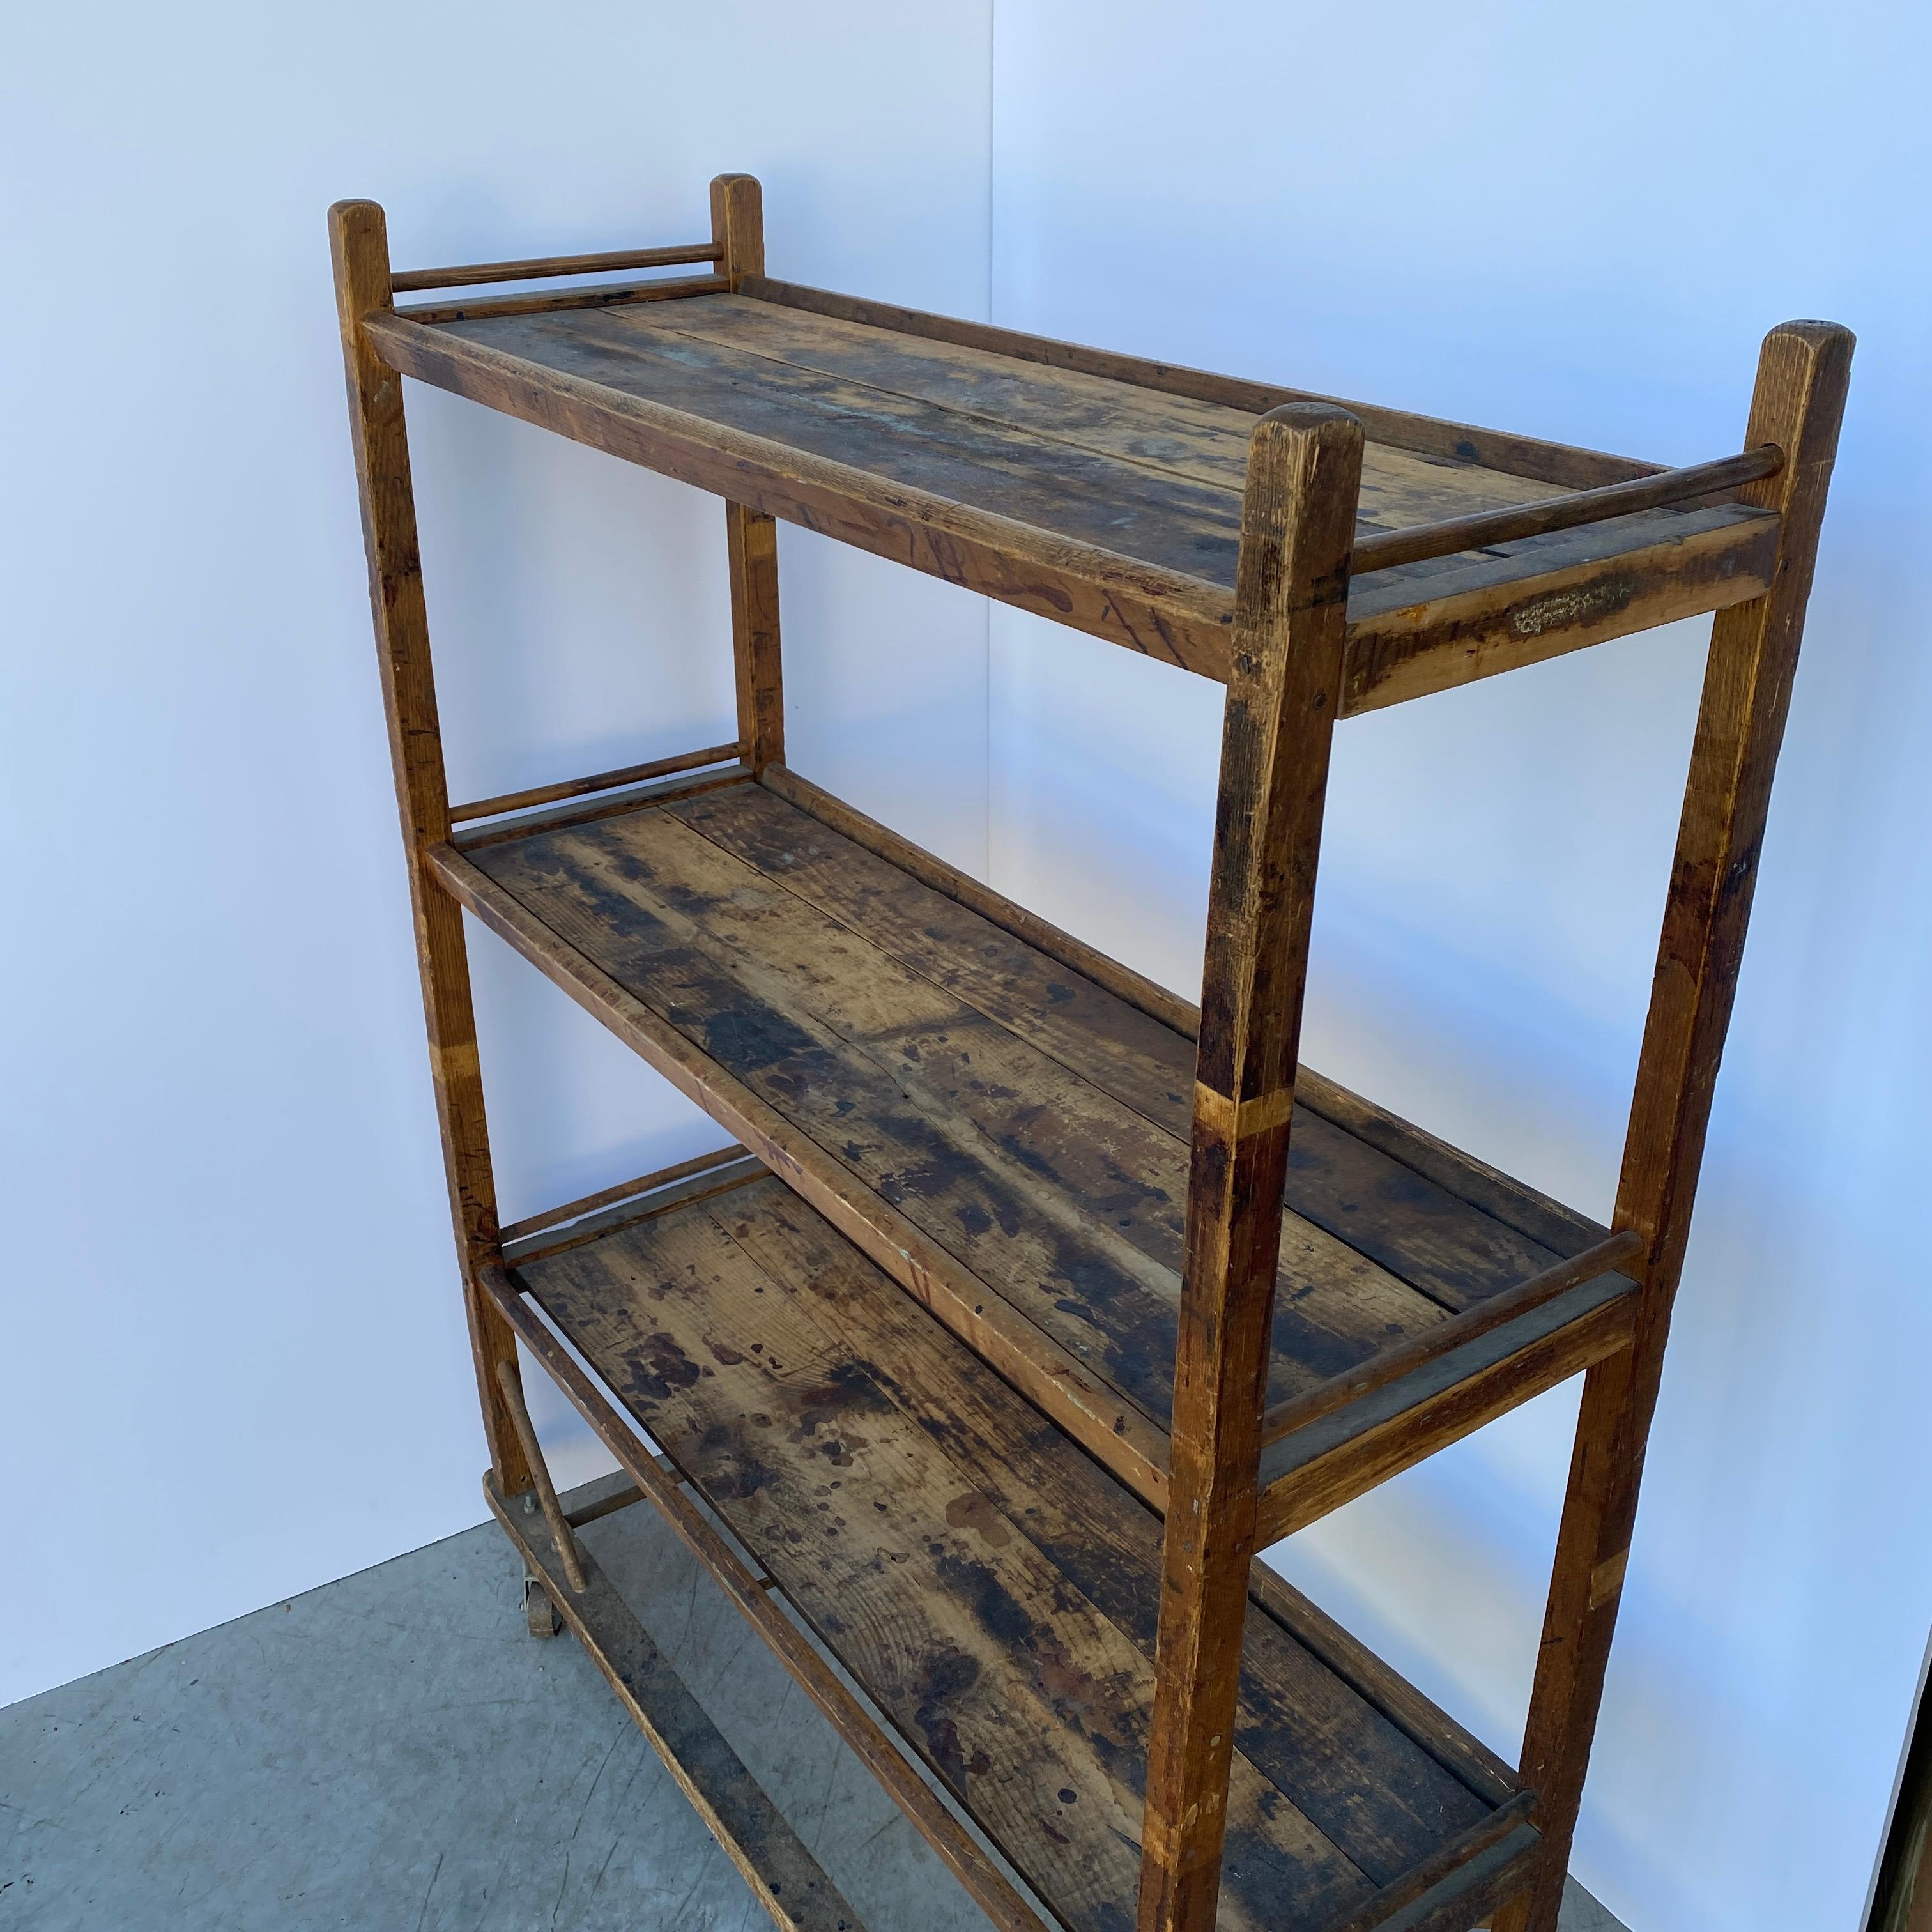 Vintage Industrial wood shelving rack. This sturdy rack on original casters has so many functions; as a shoe rack, book case or in an kitchen or pantry, will be an excellent addition to your home. All original, with vintage patina, the rack boasts 3